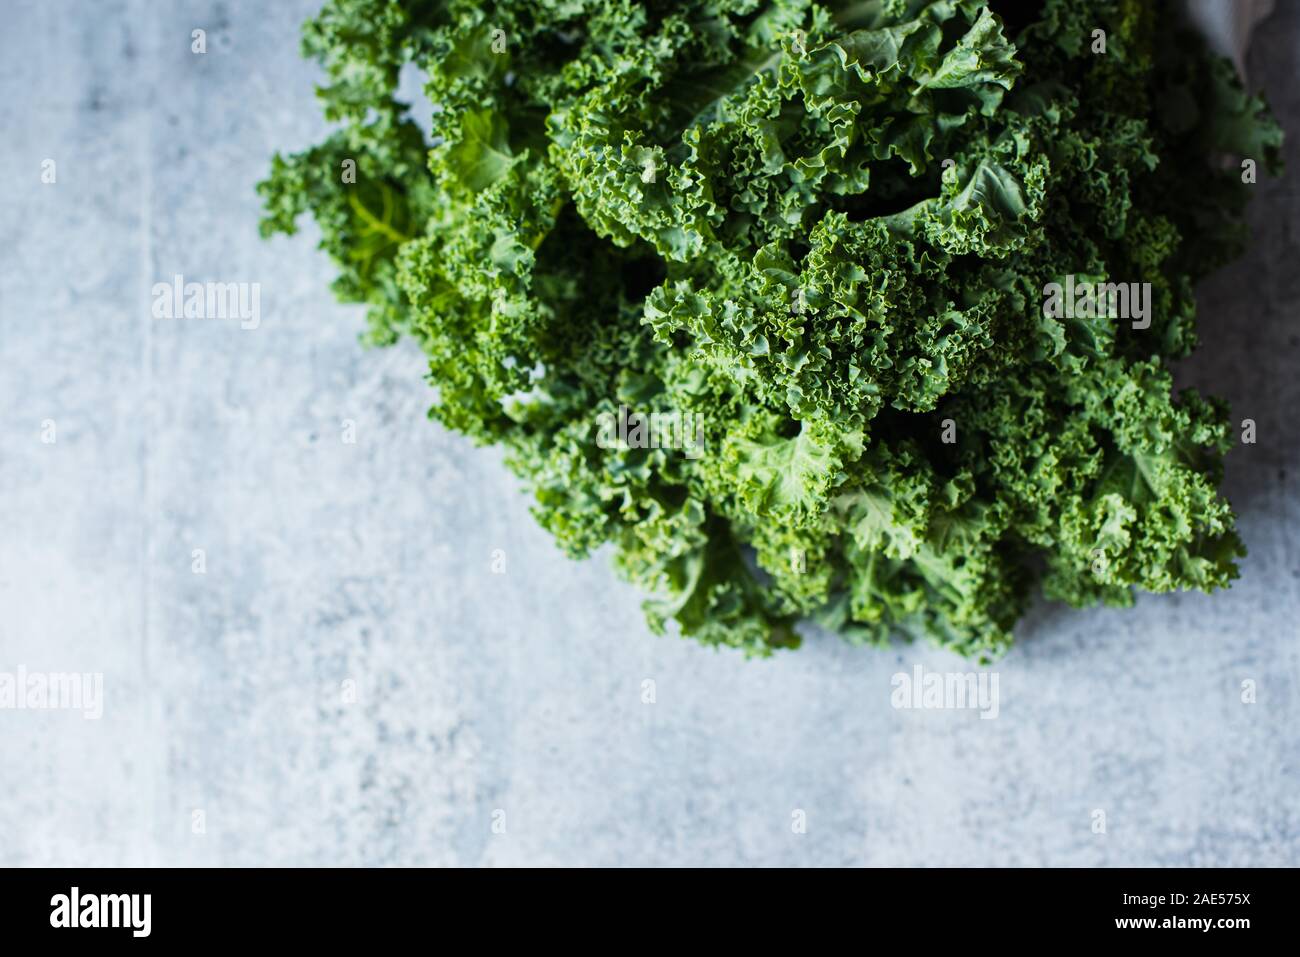 Close up top view of bunch of kale leaves against a cement counter. Stock Photo